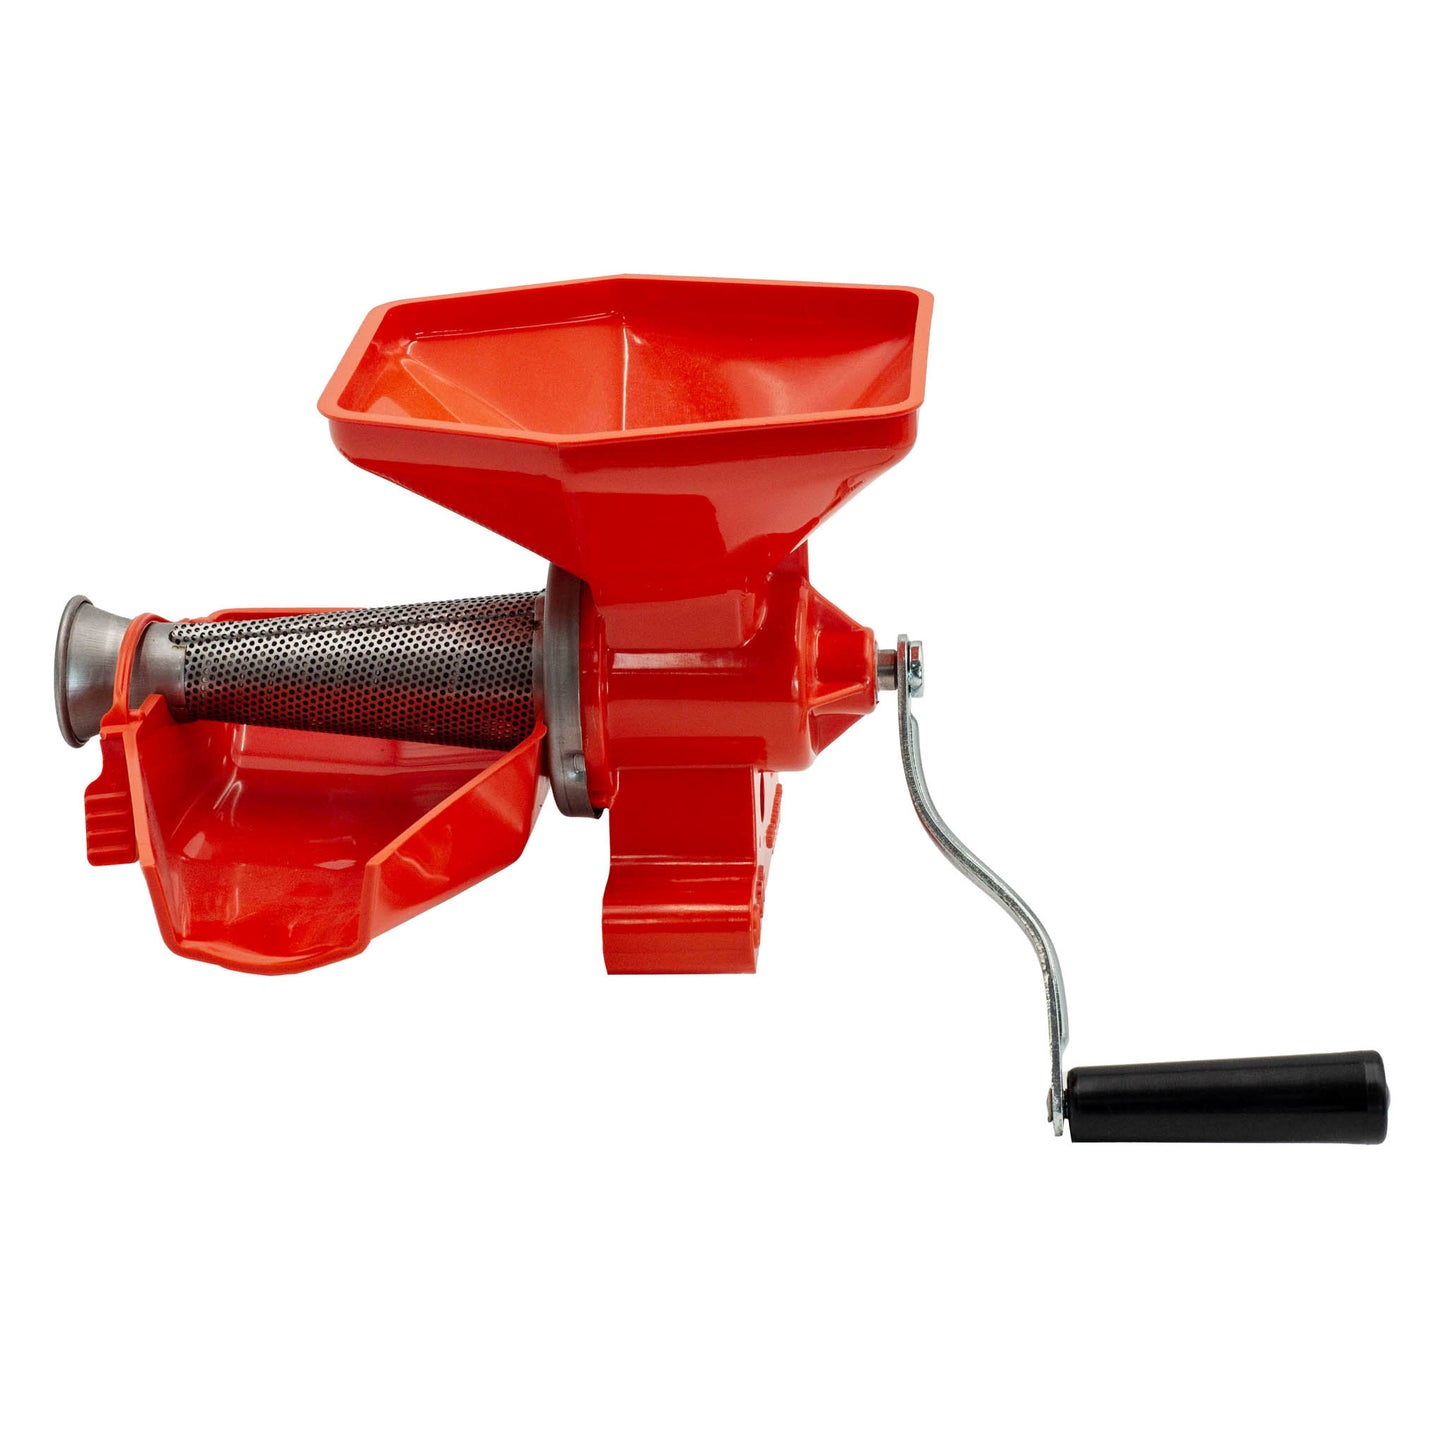 SP2 manual passata machine by Fabio Leonardi. Made with food grade plastic, stainless steel and cast iron. Made for mincing tomatoes to make passata. 